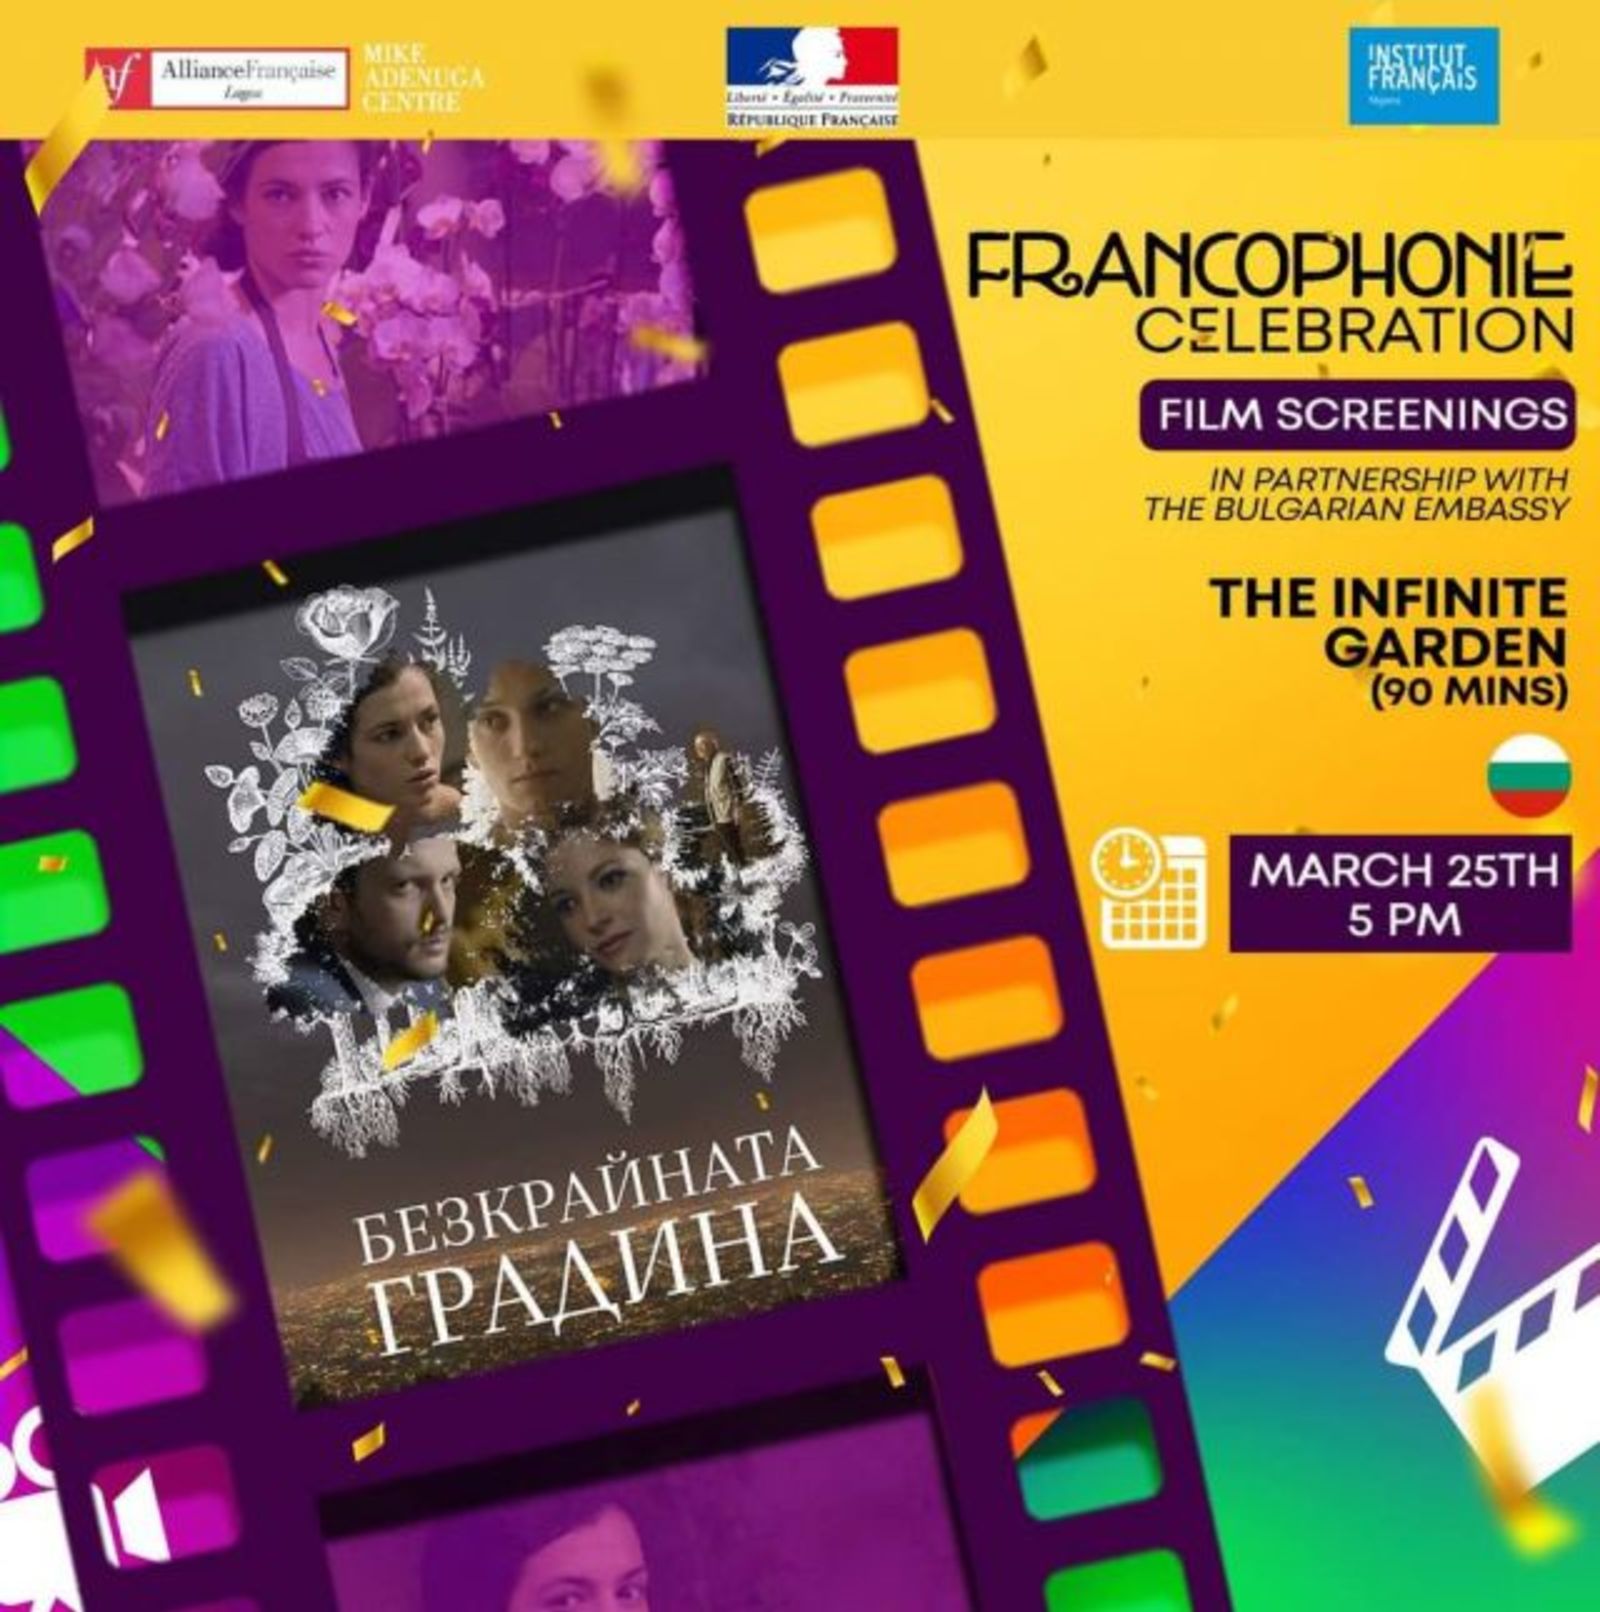 Presentation of the film "The Infinite Garden" in Lagos at the Francophonie Week in Nigeria